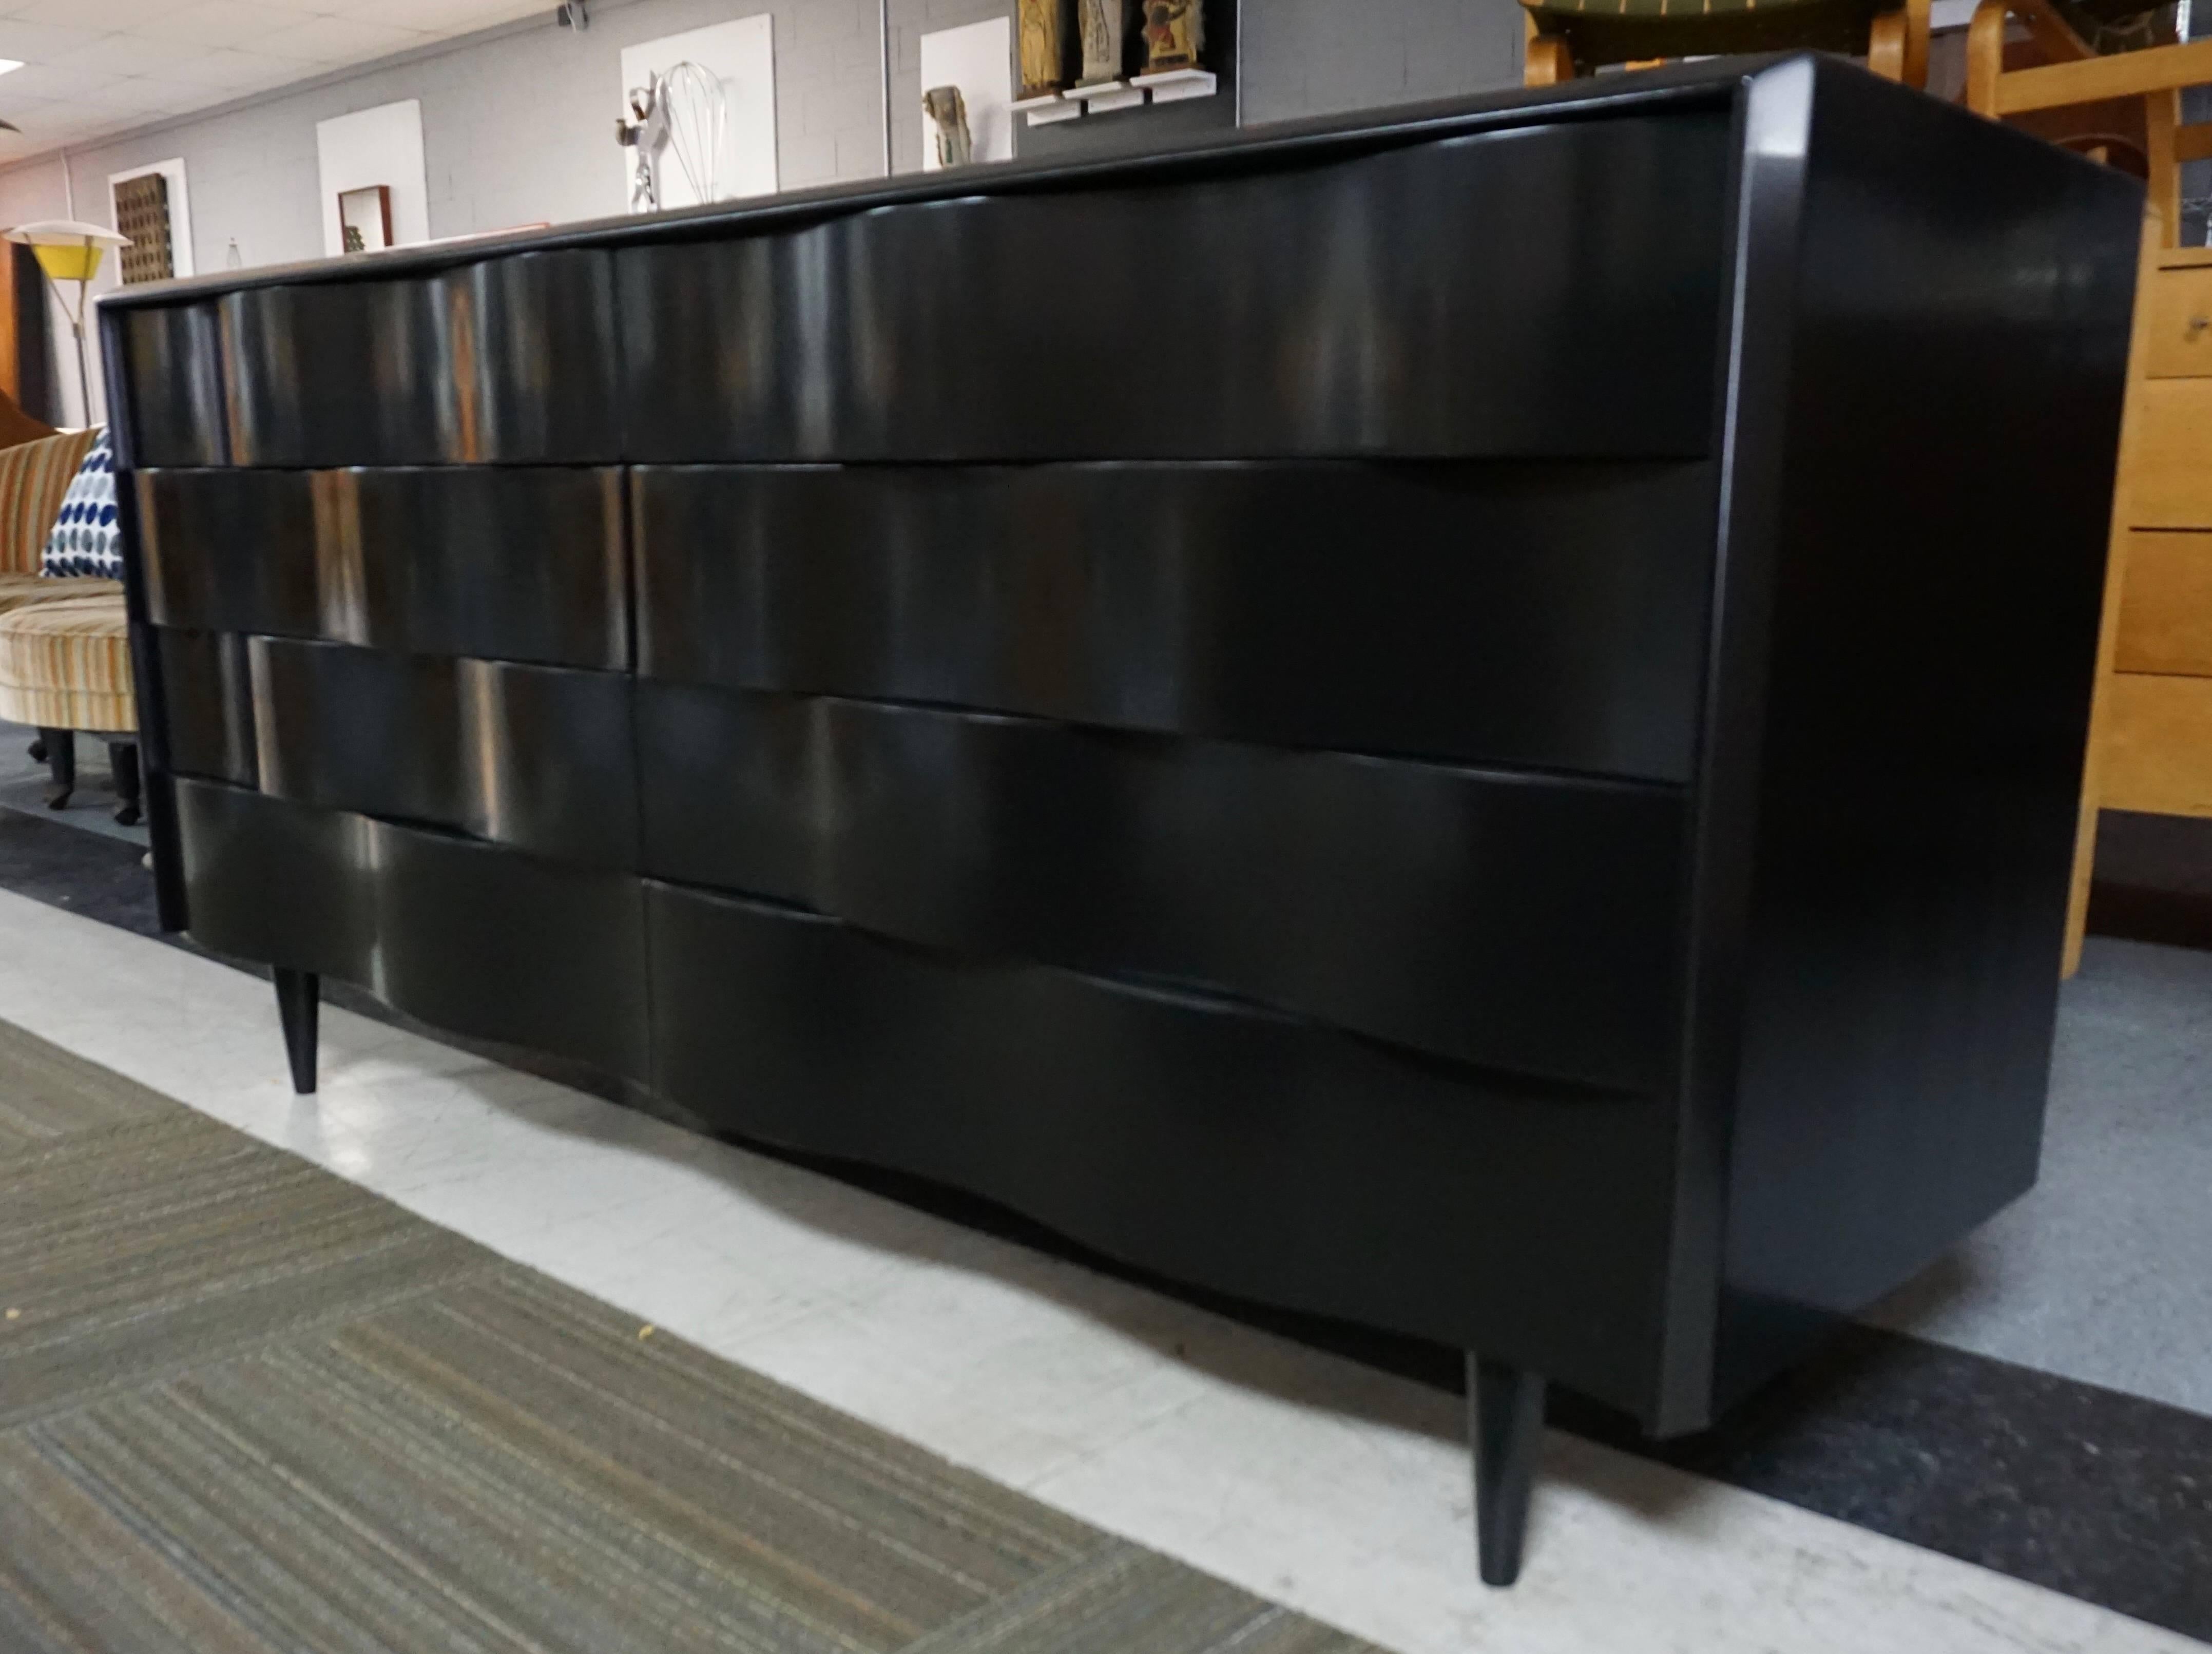 All redone with six coats of black lacquer. Eight drawers. Insides of drawers are very nice. Made in Sweden.